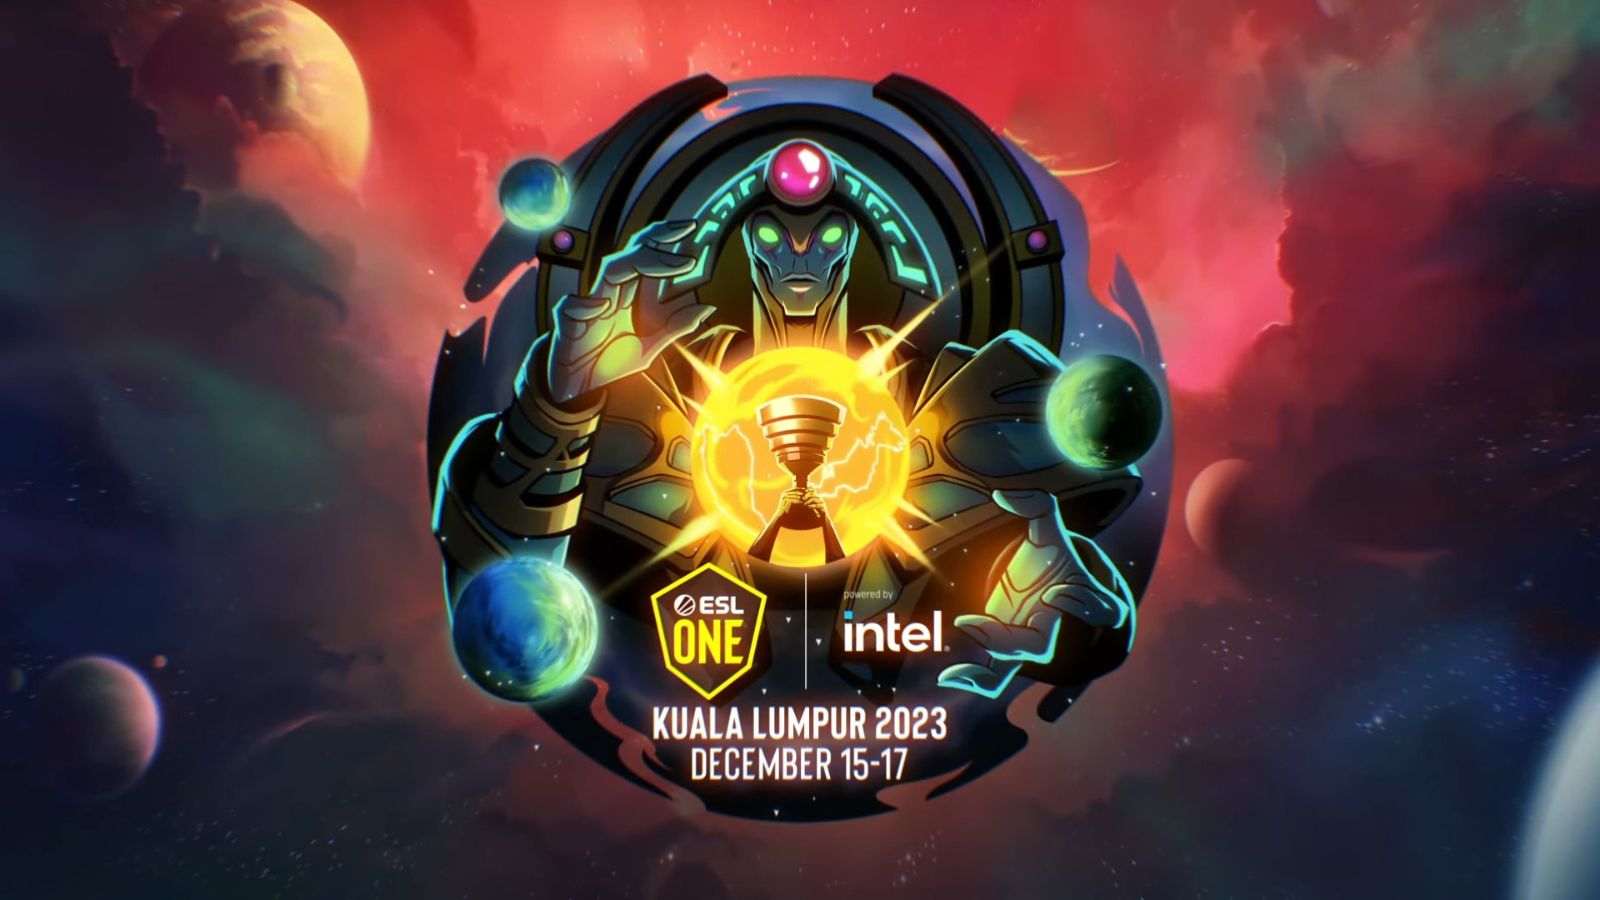 ESL One comes to Kuala Lumpur with US$1 million prize pool - ONE Esports